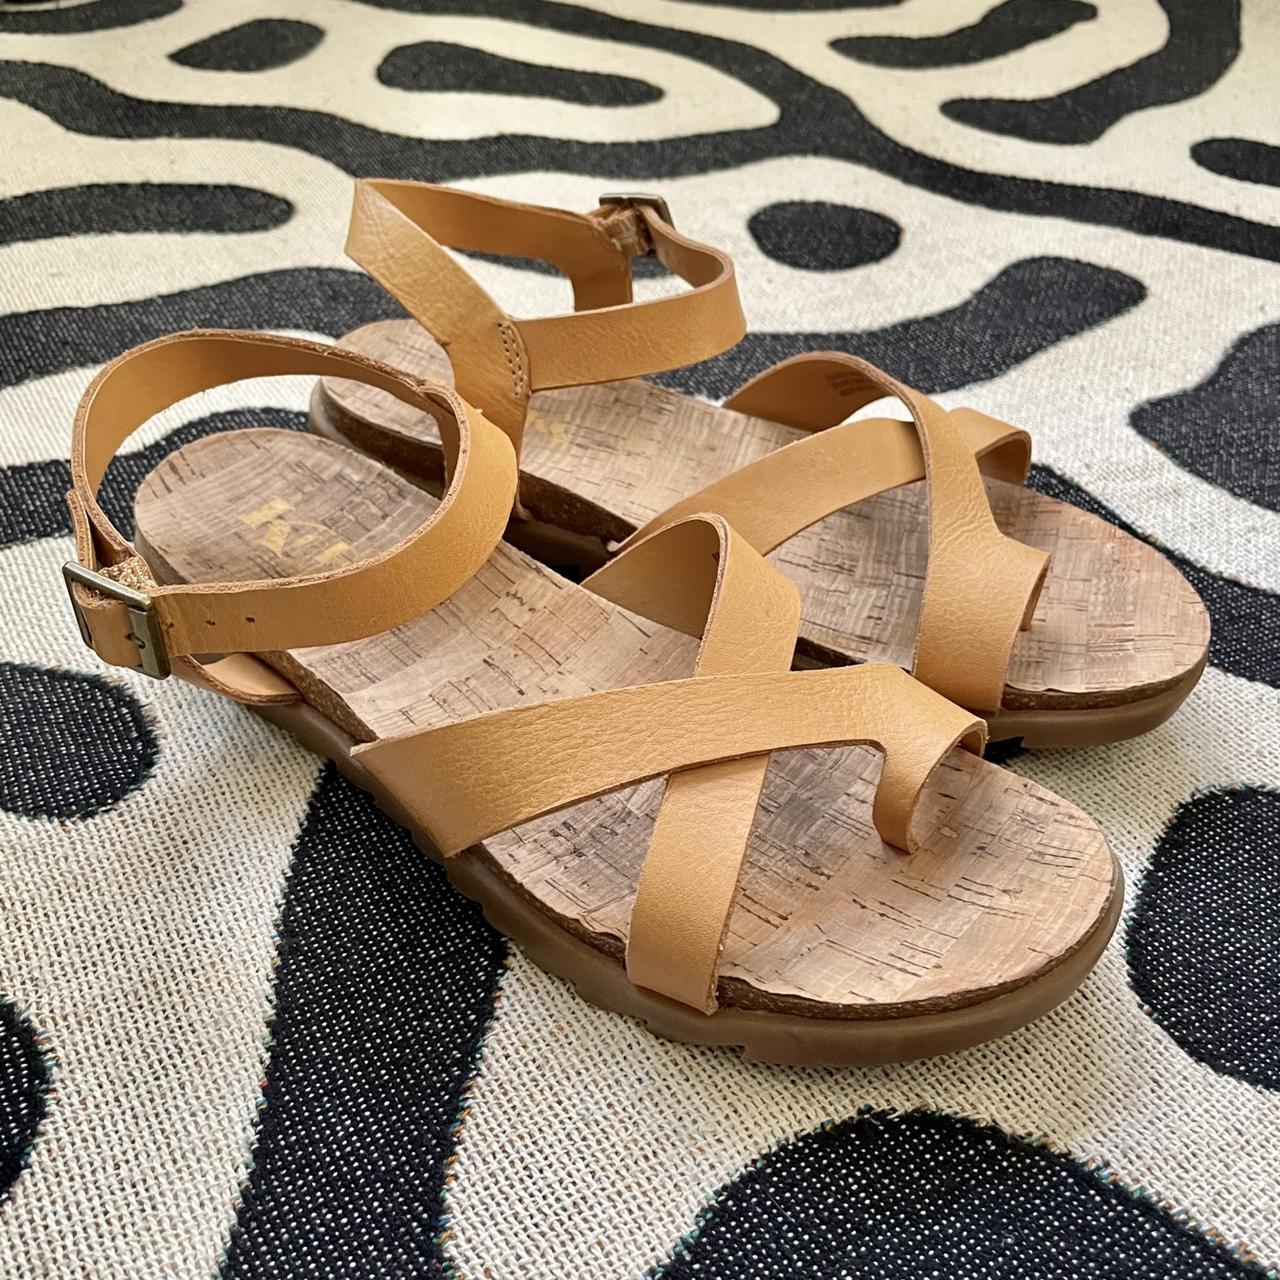 Korks Women's Tan and Brown Sandals (4)